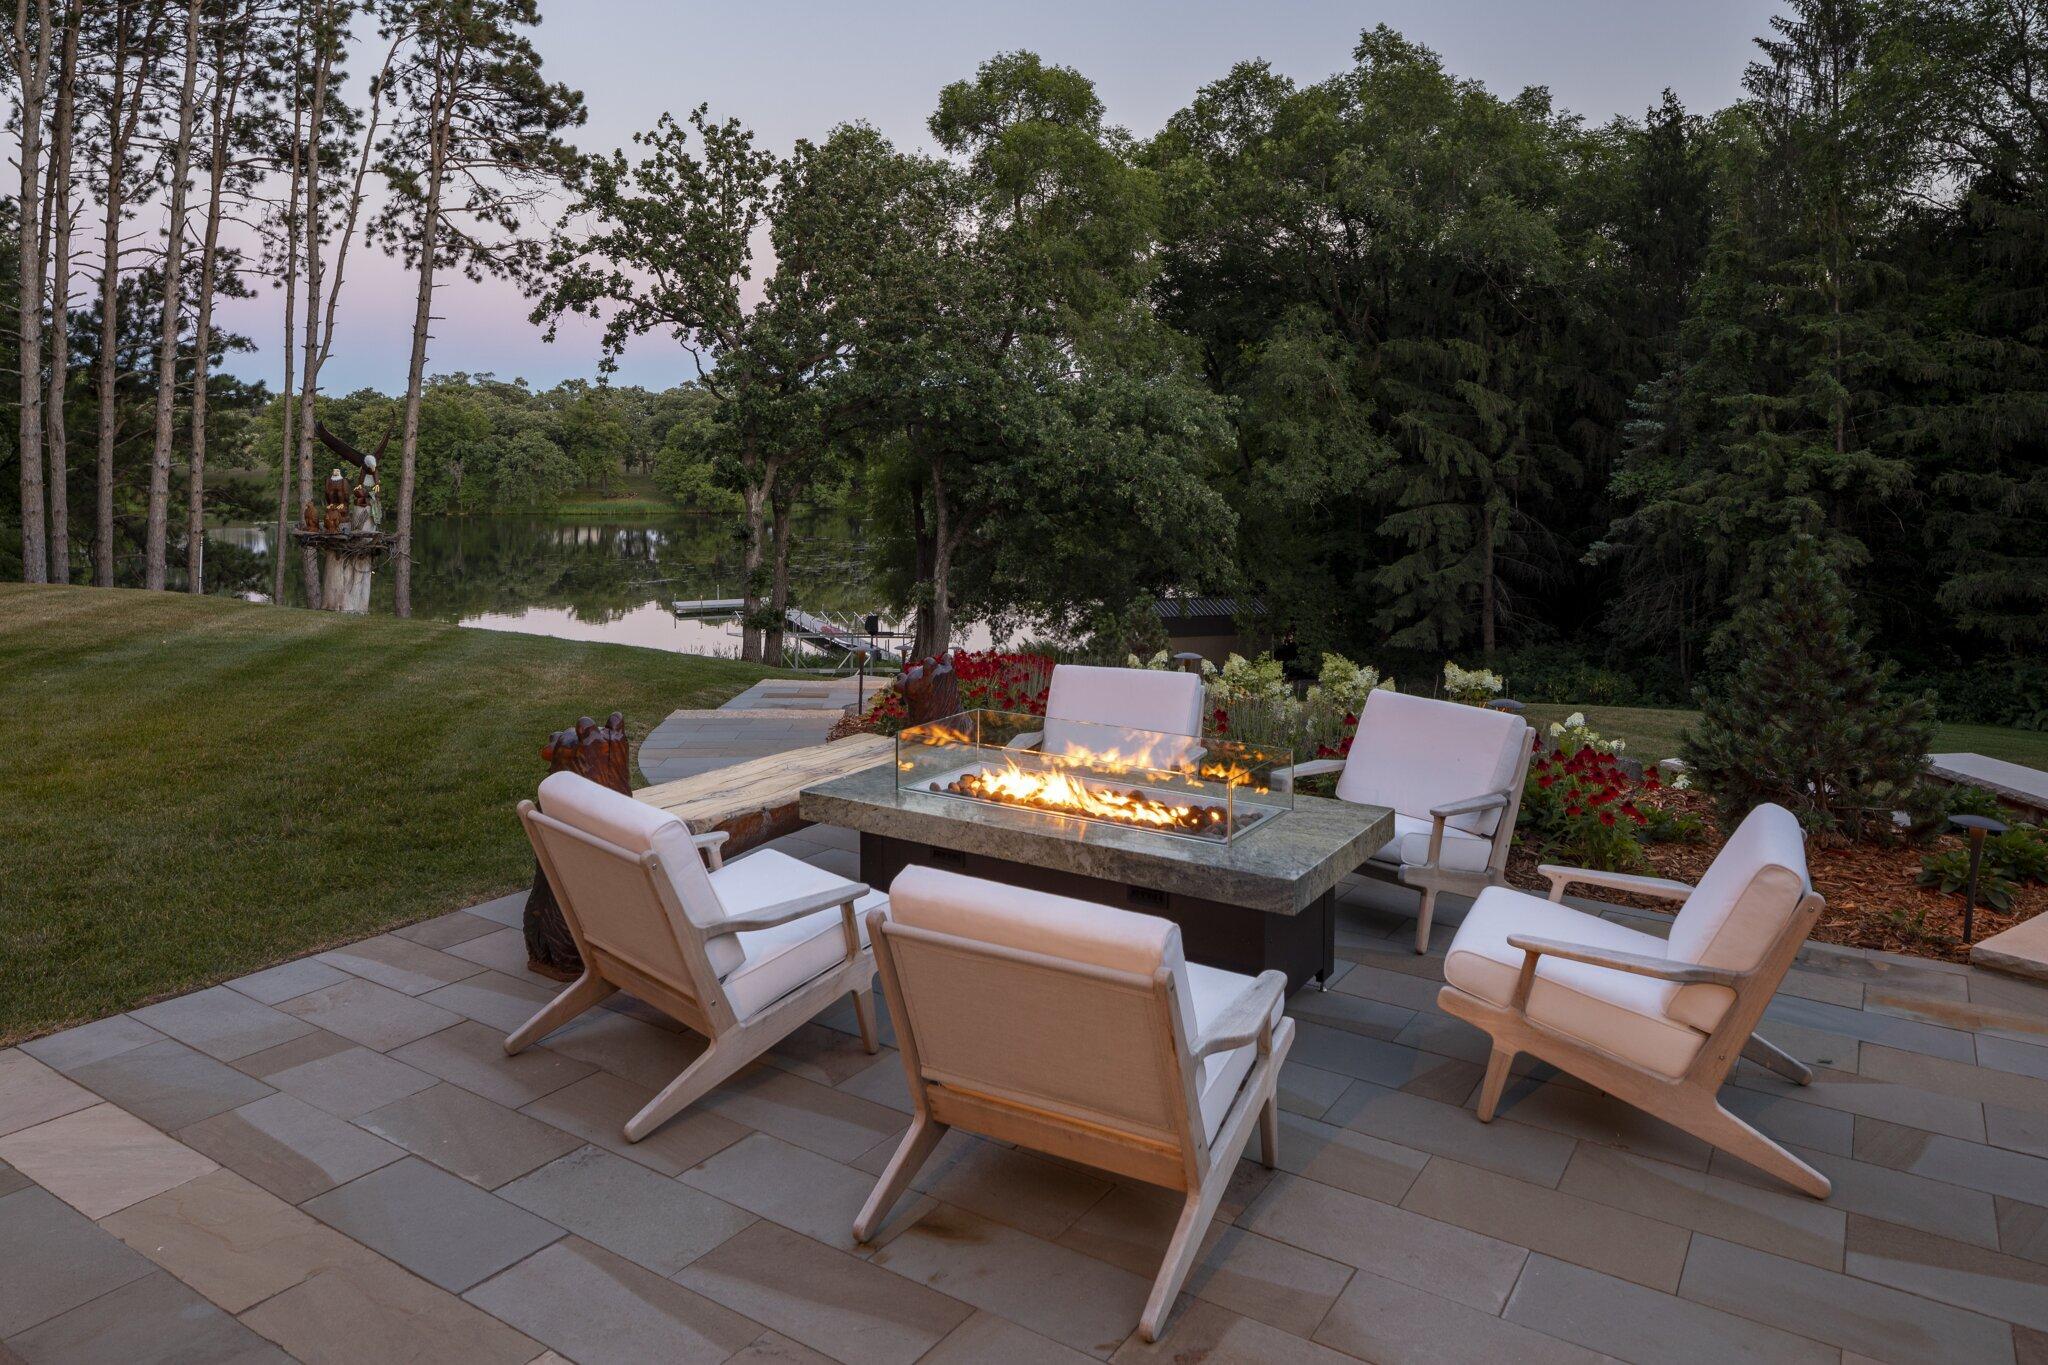 fire table on a bluestone patio overlooking a lake